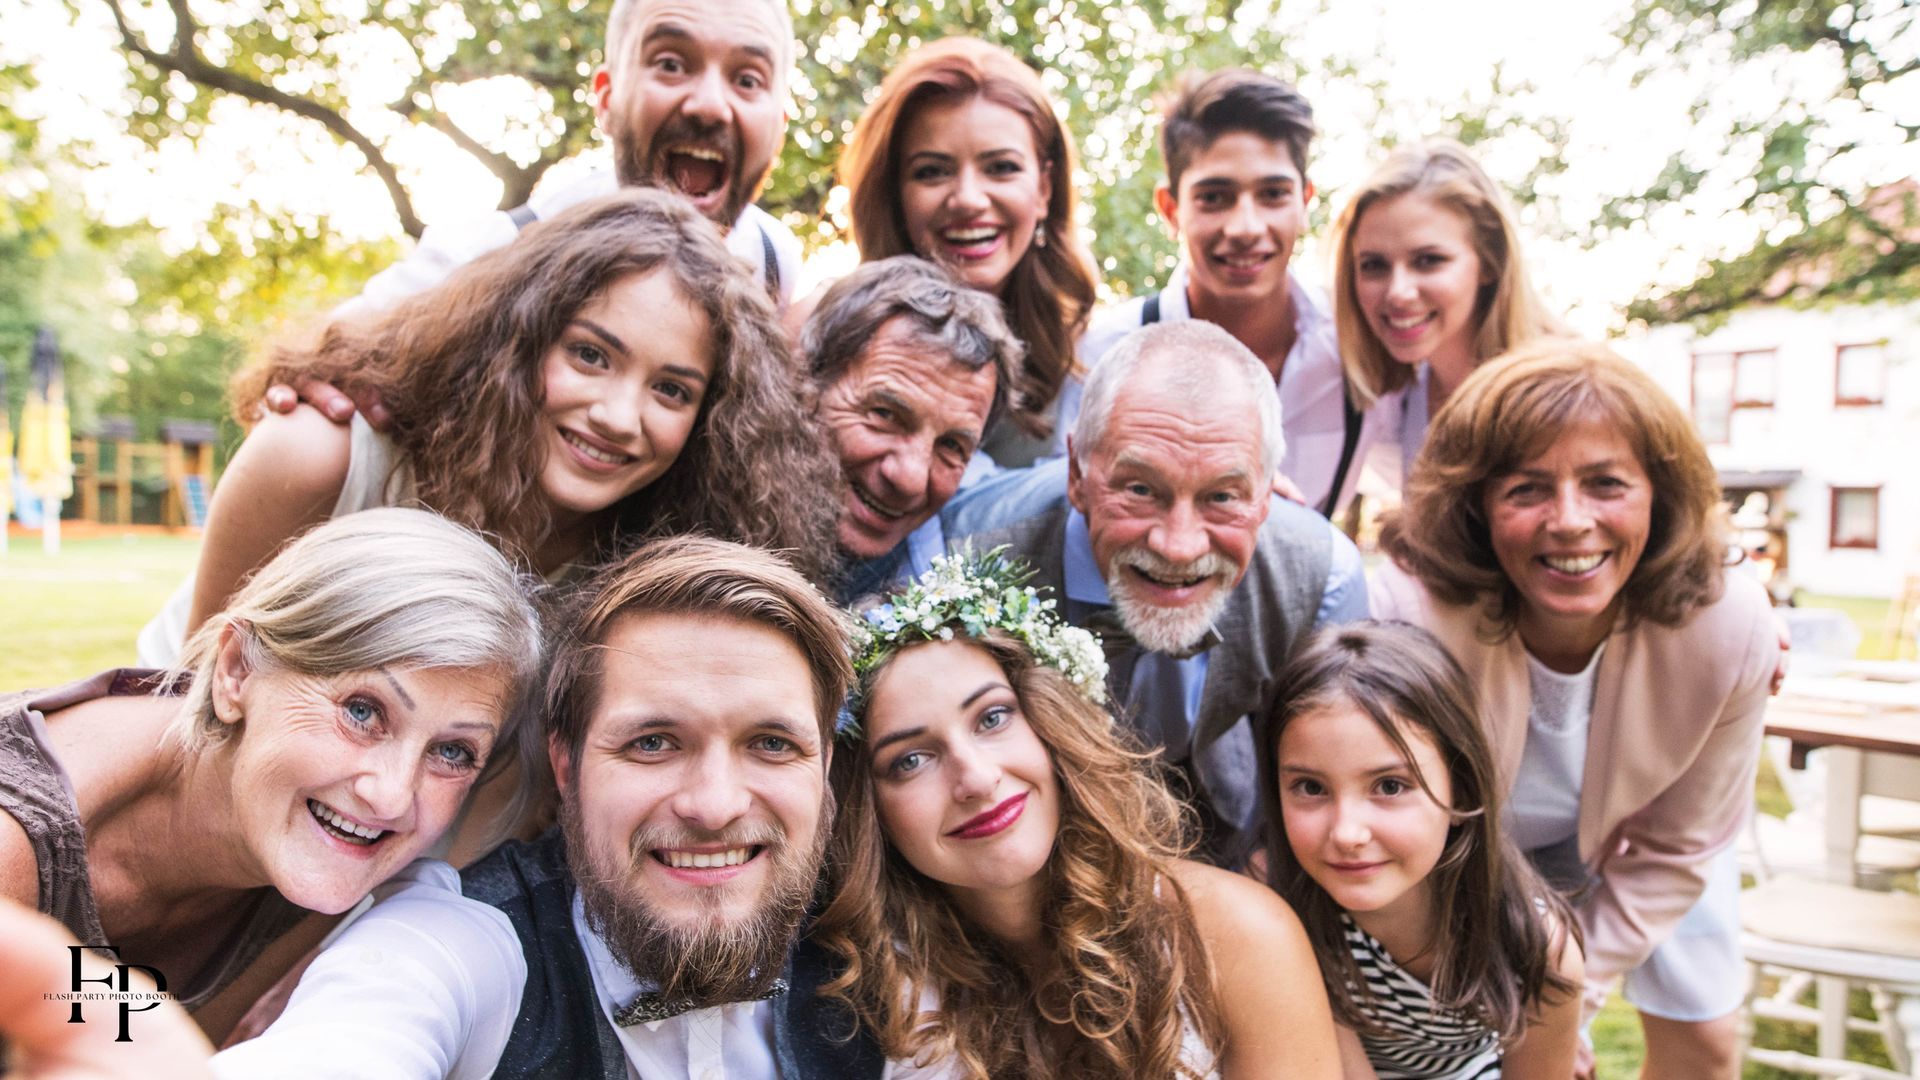 Bride and groom surrounded by families and friends during their wedding day